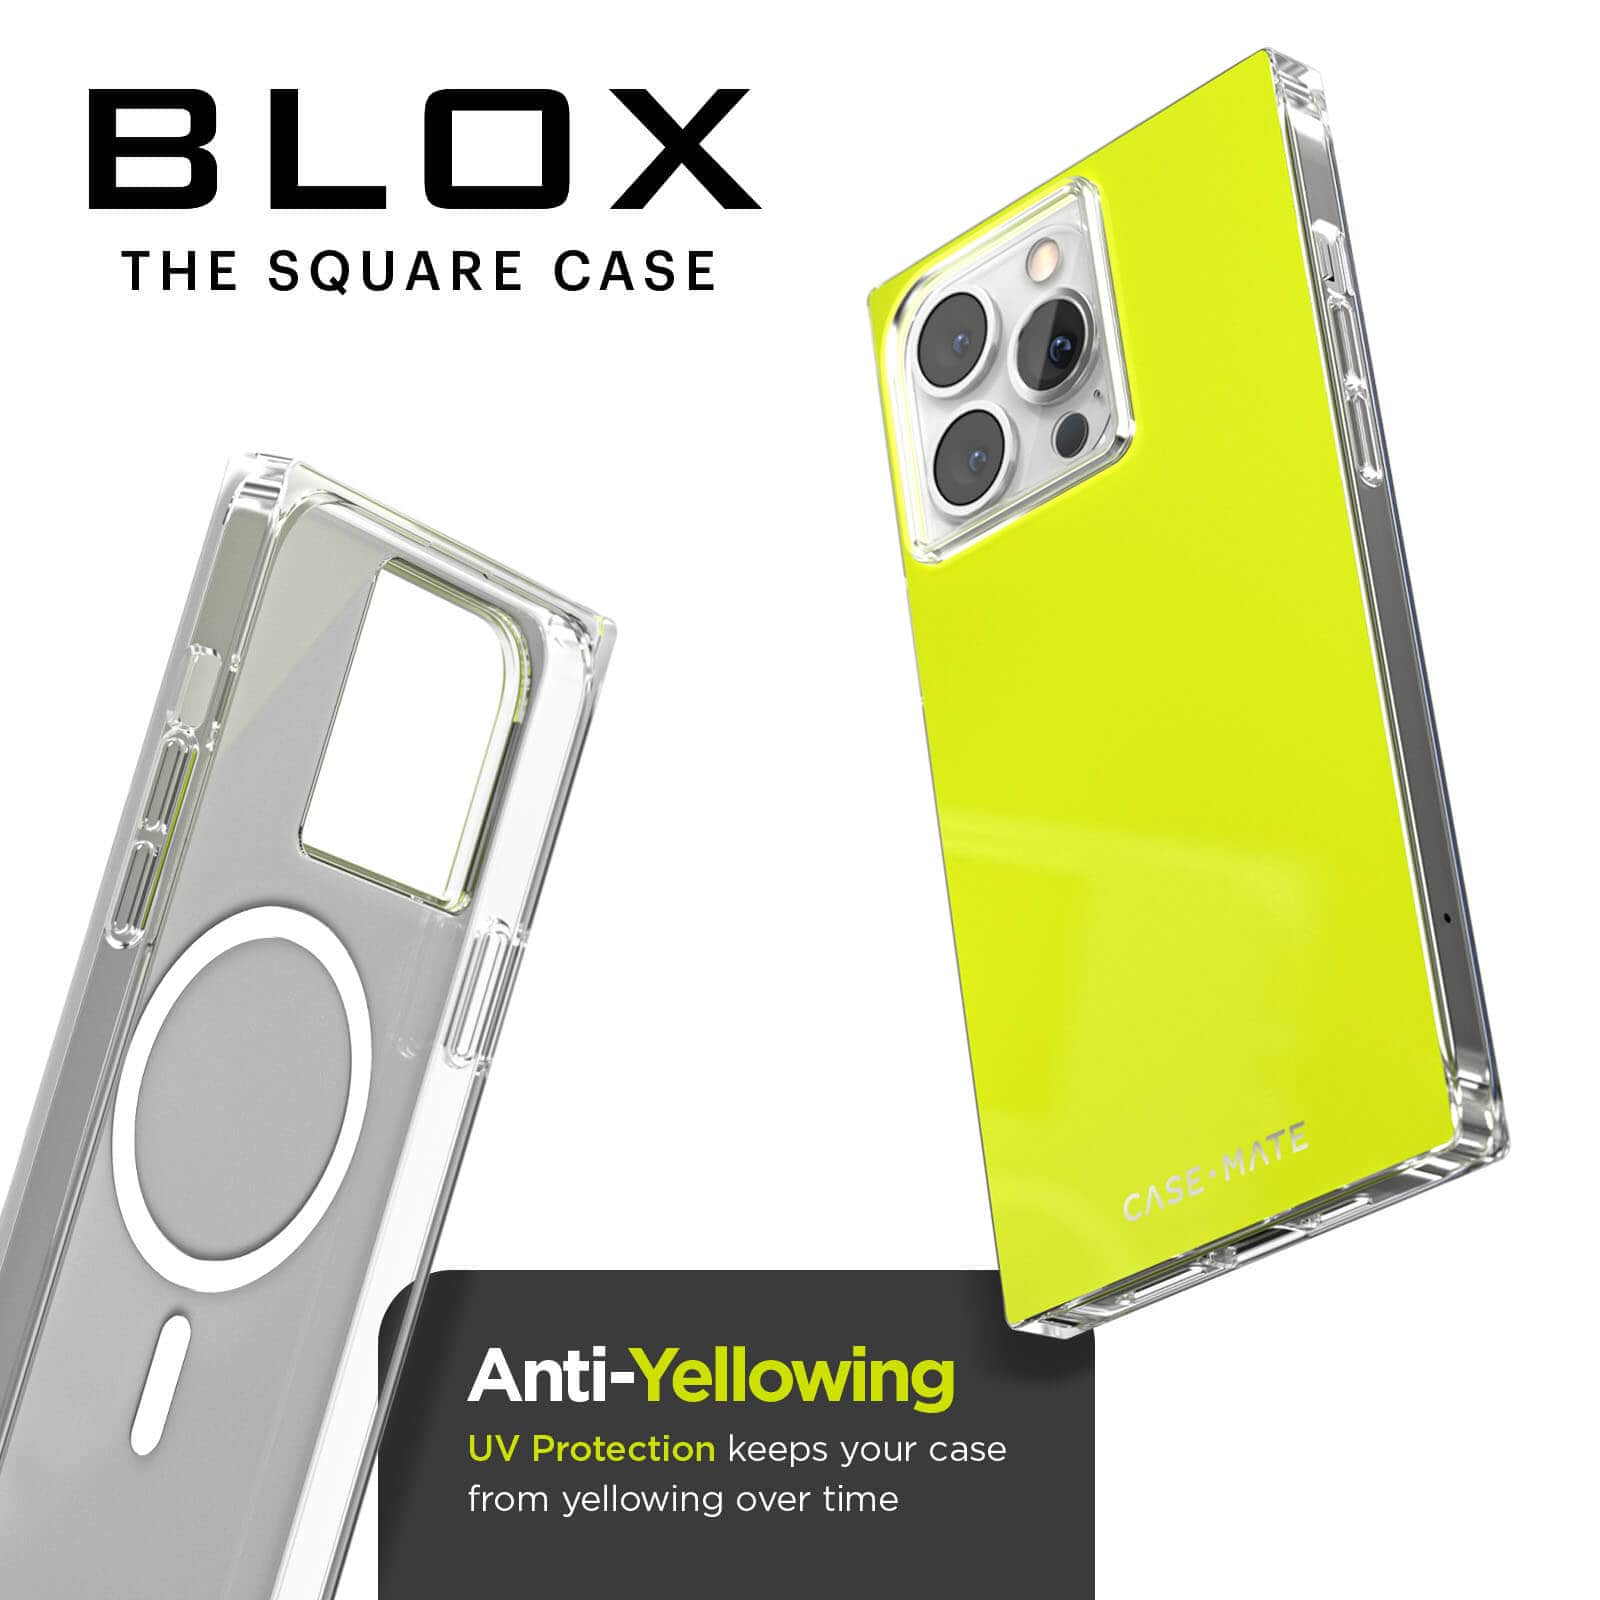 BLOX the Square Case. Anti-yellowing UV protection keeps your case from yellowing over time. color::Neon Yellow